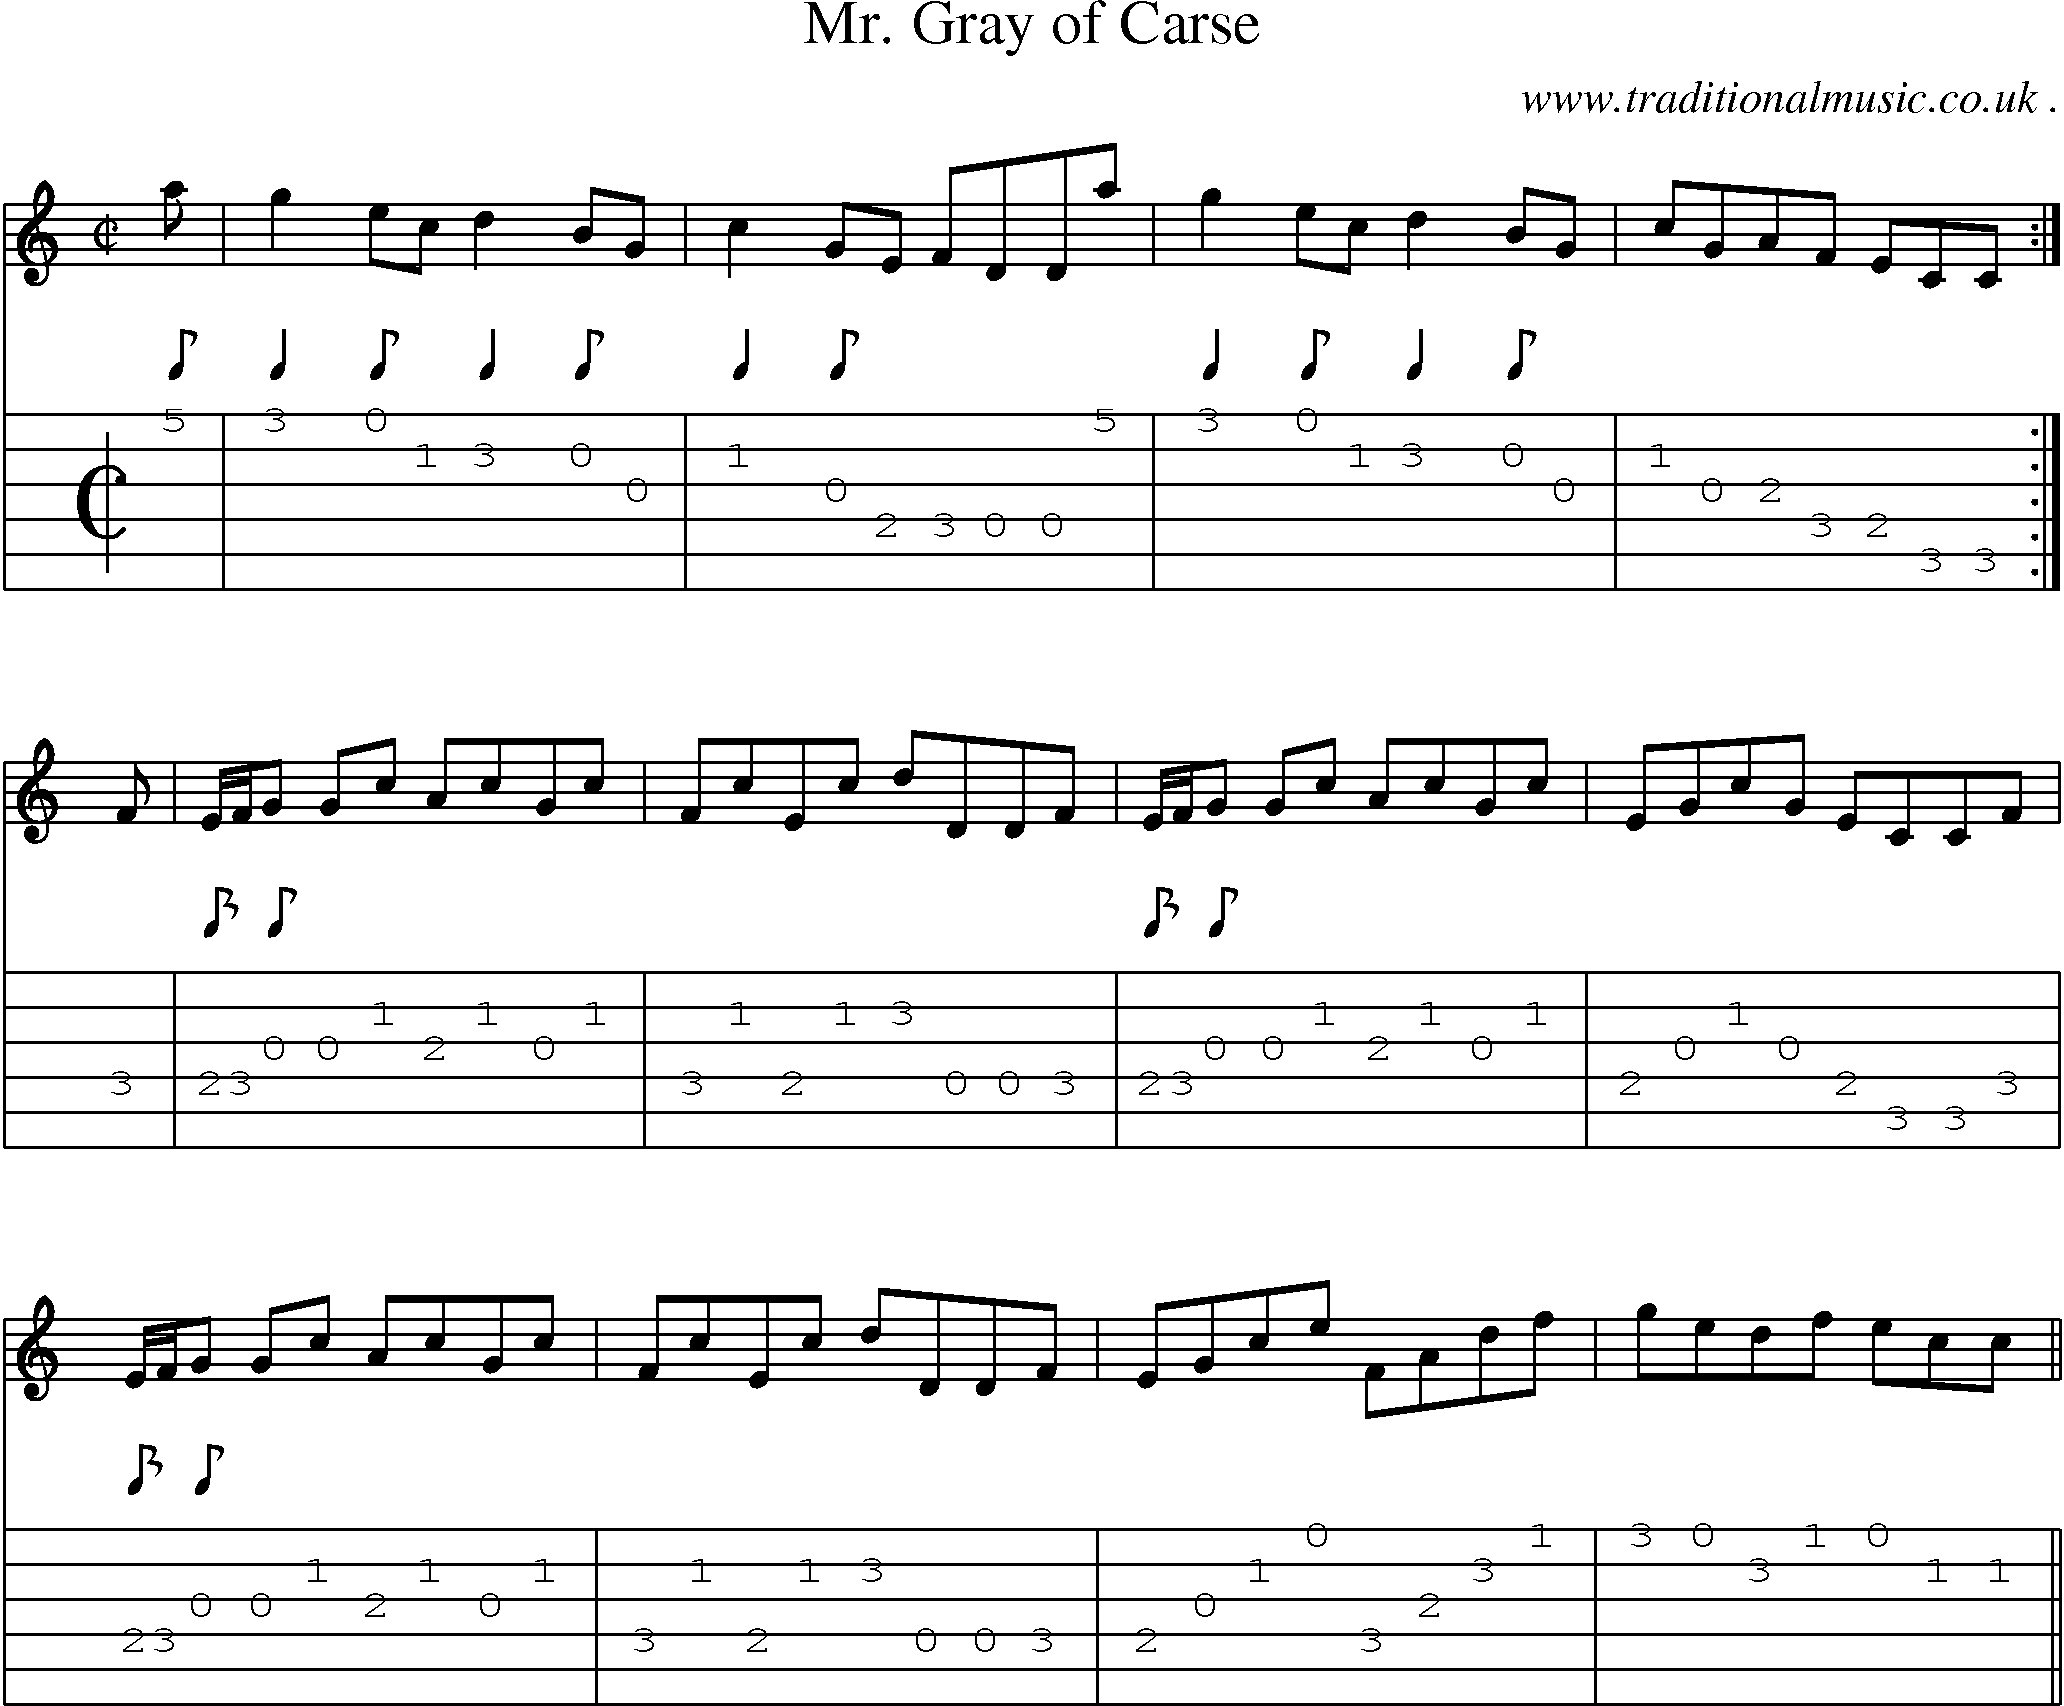 Sheet-music  score, Chords and Guitar Tabs for Mr Gray Of Carse